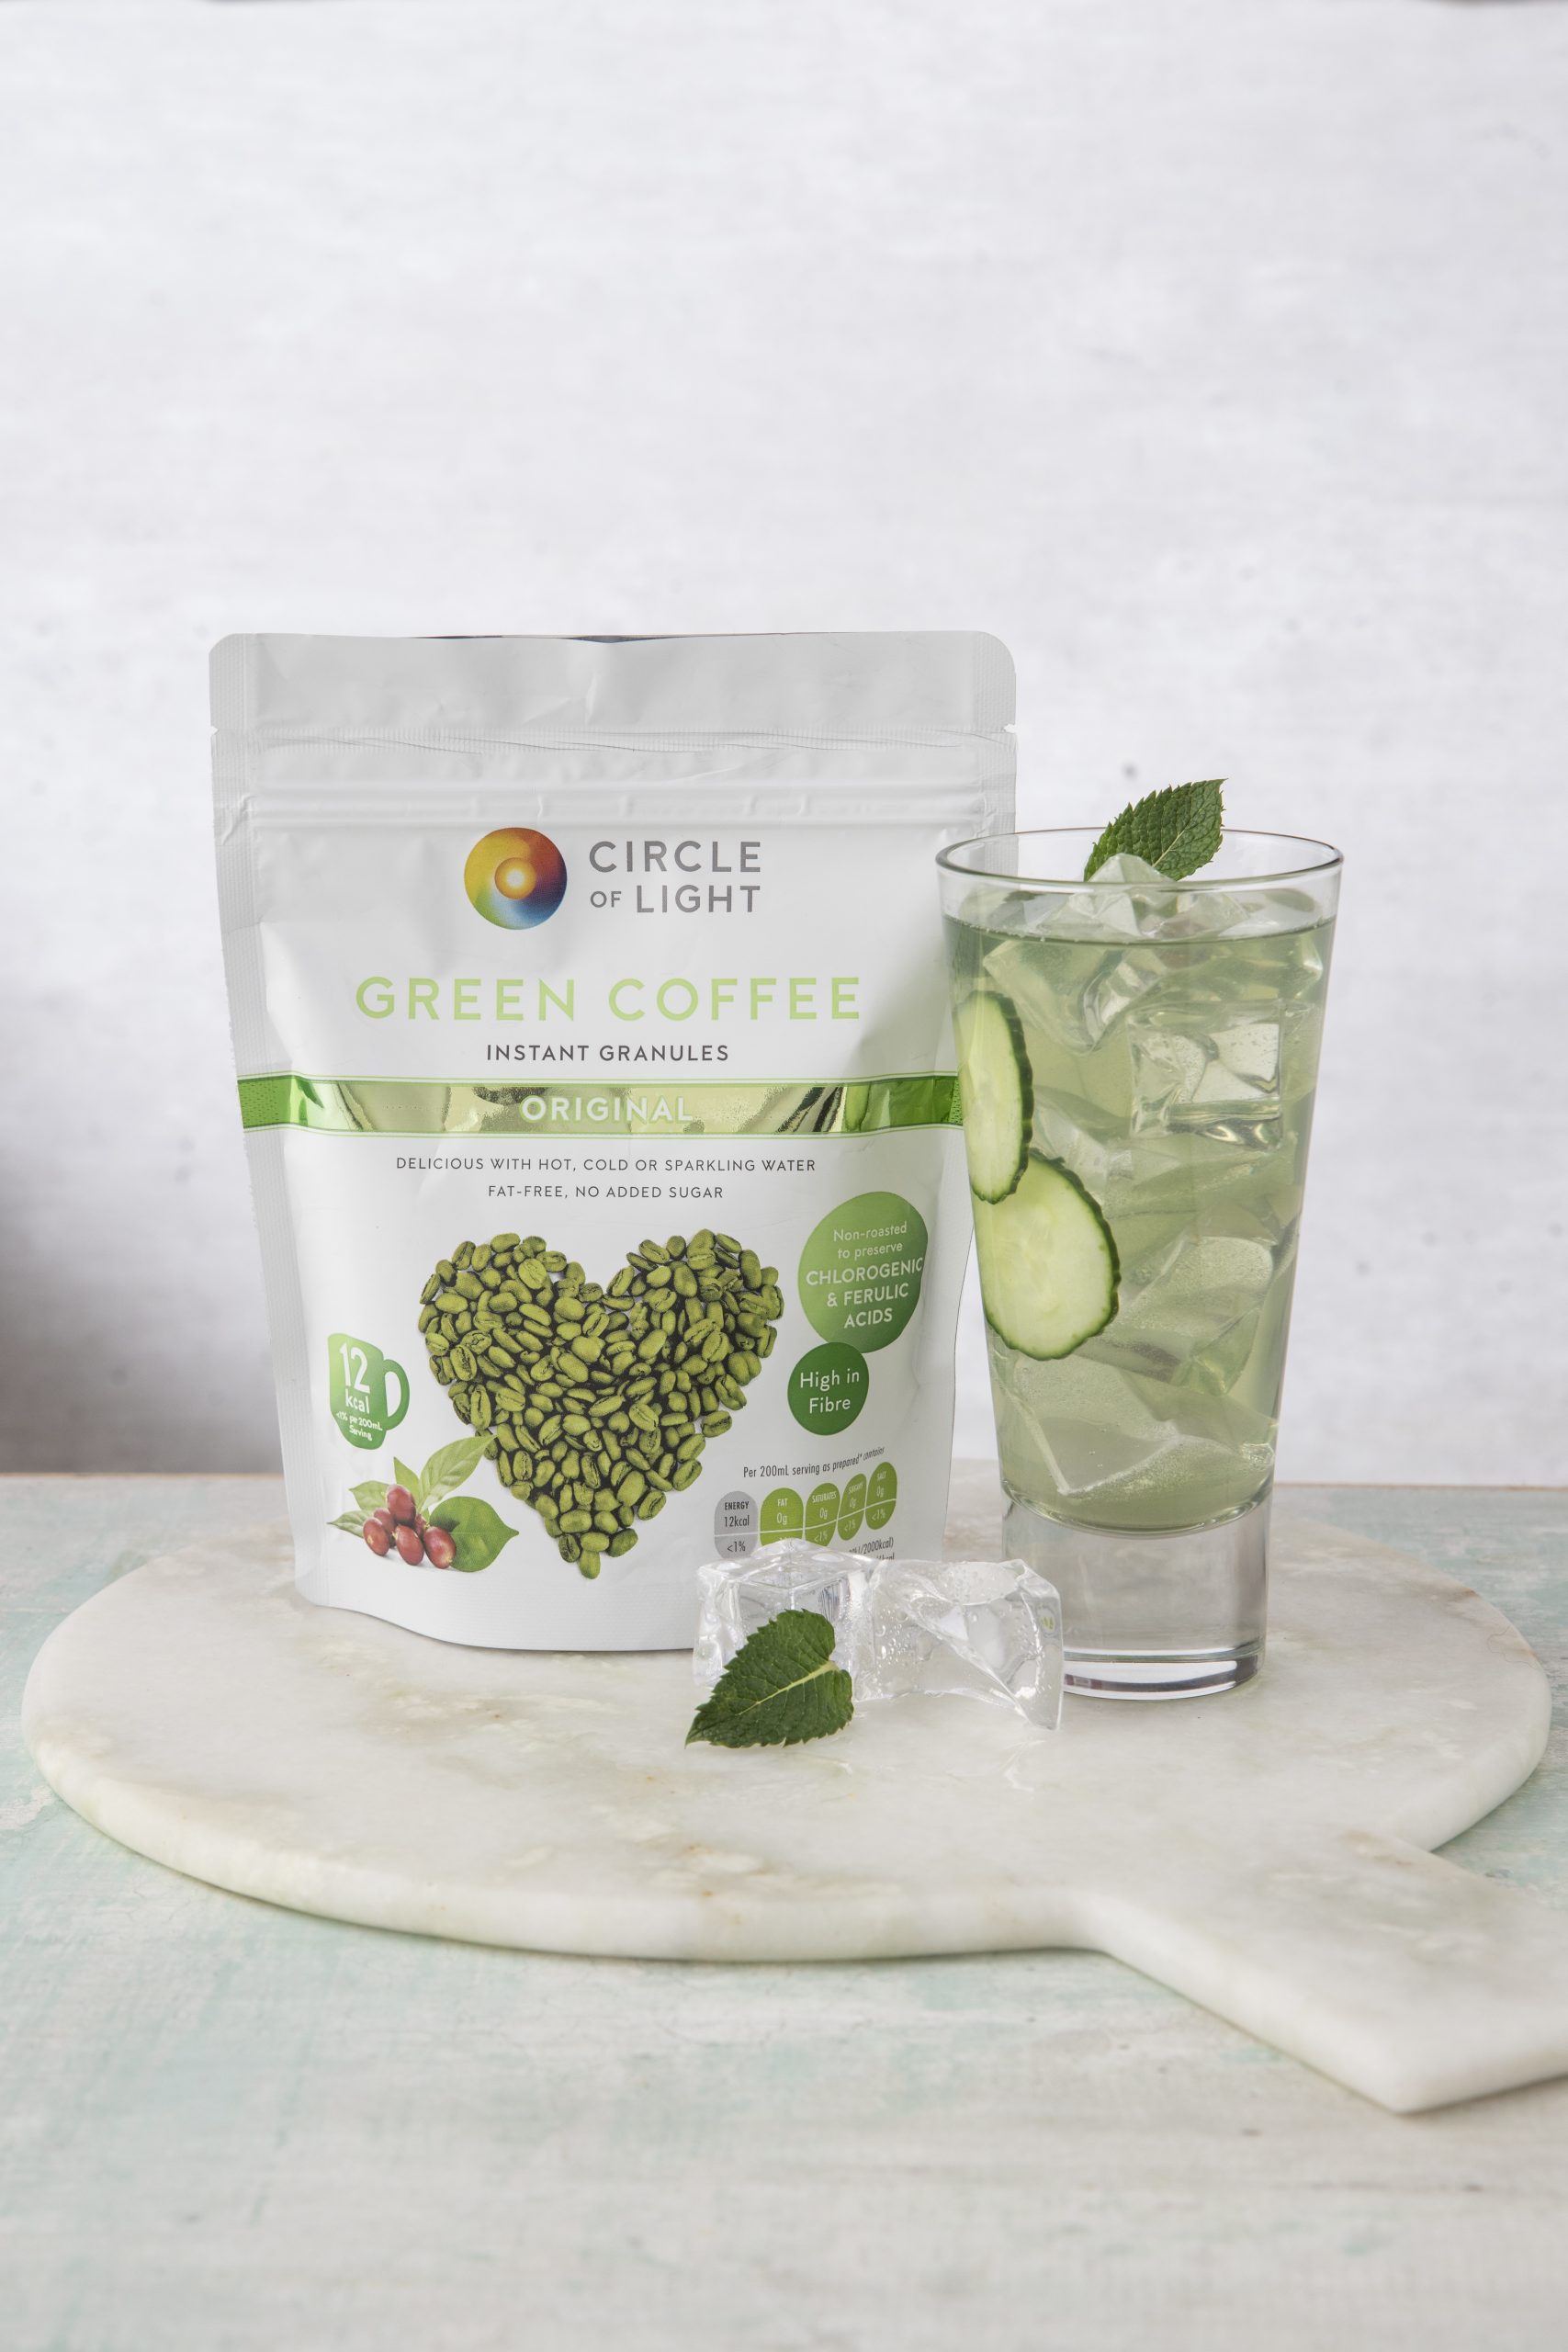 Circle of Light launches first-to-market range of Green Coffee and health beverages